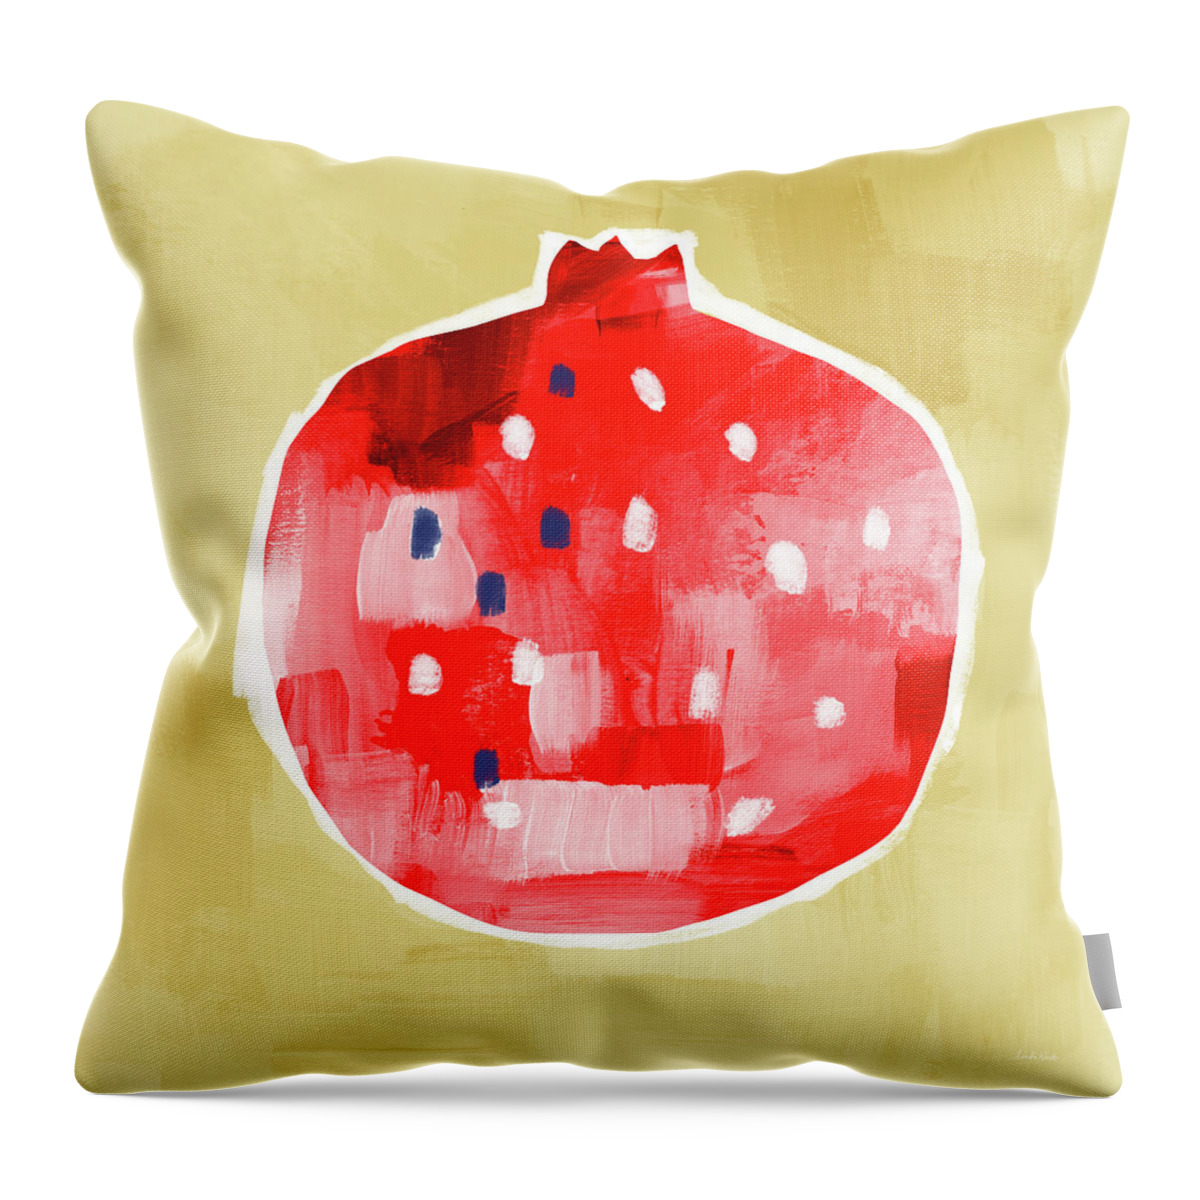 Fruit Throw Pillow featuring the mixed media Red Pomegranate- Art by Linda Woods by Linda Woods